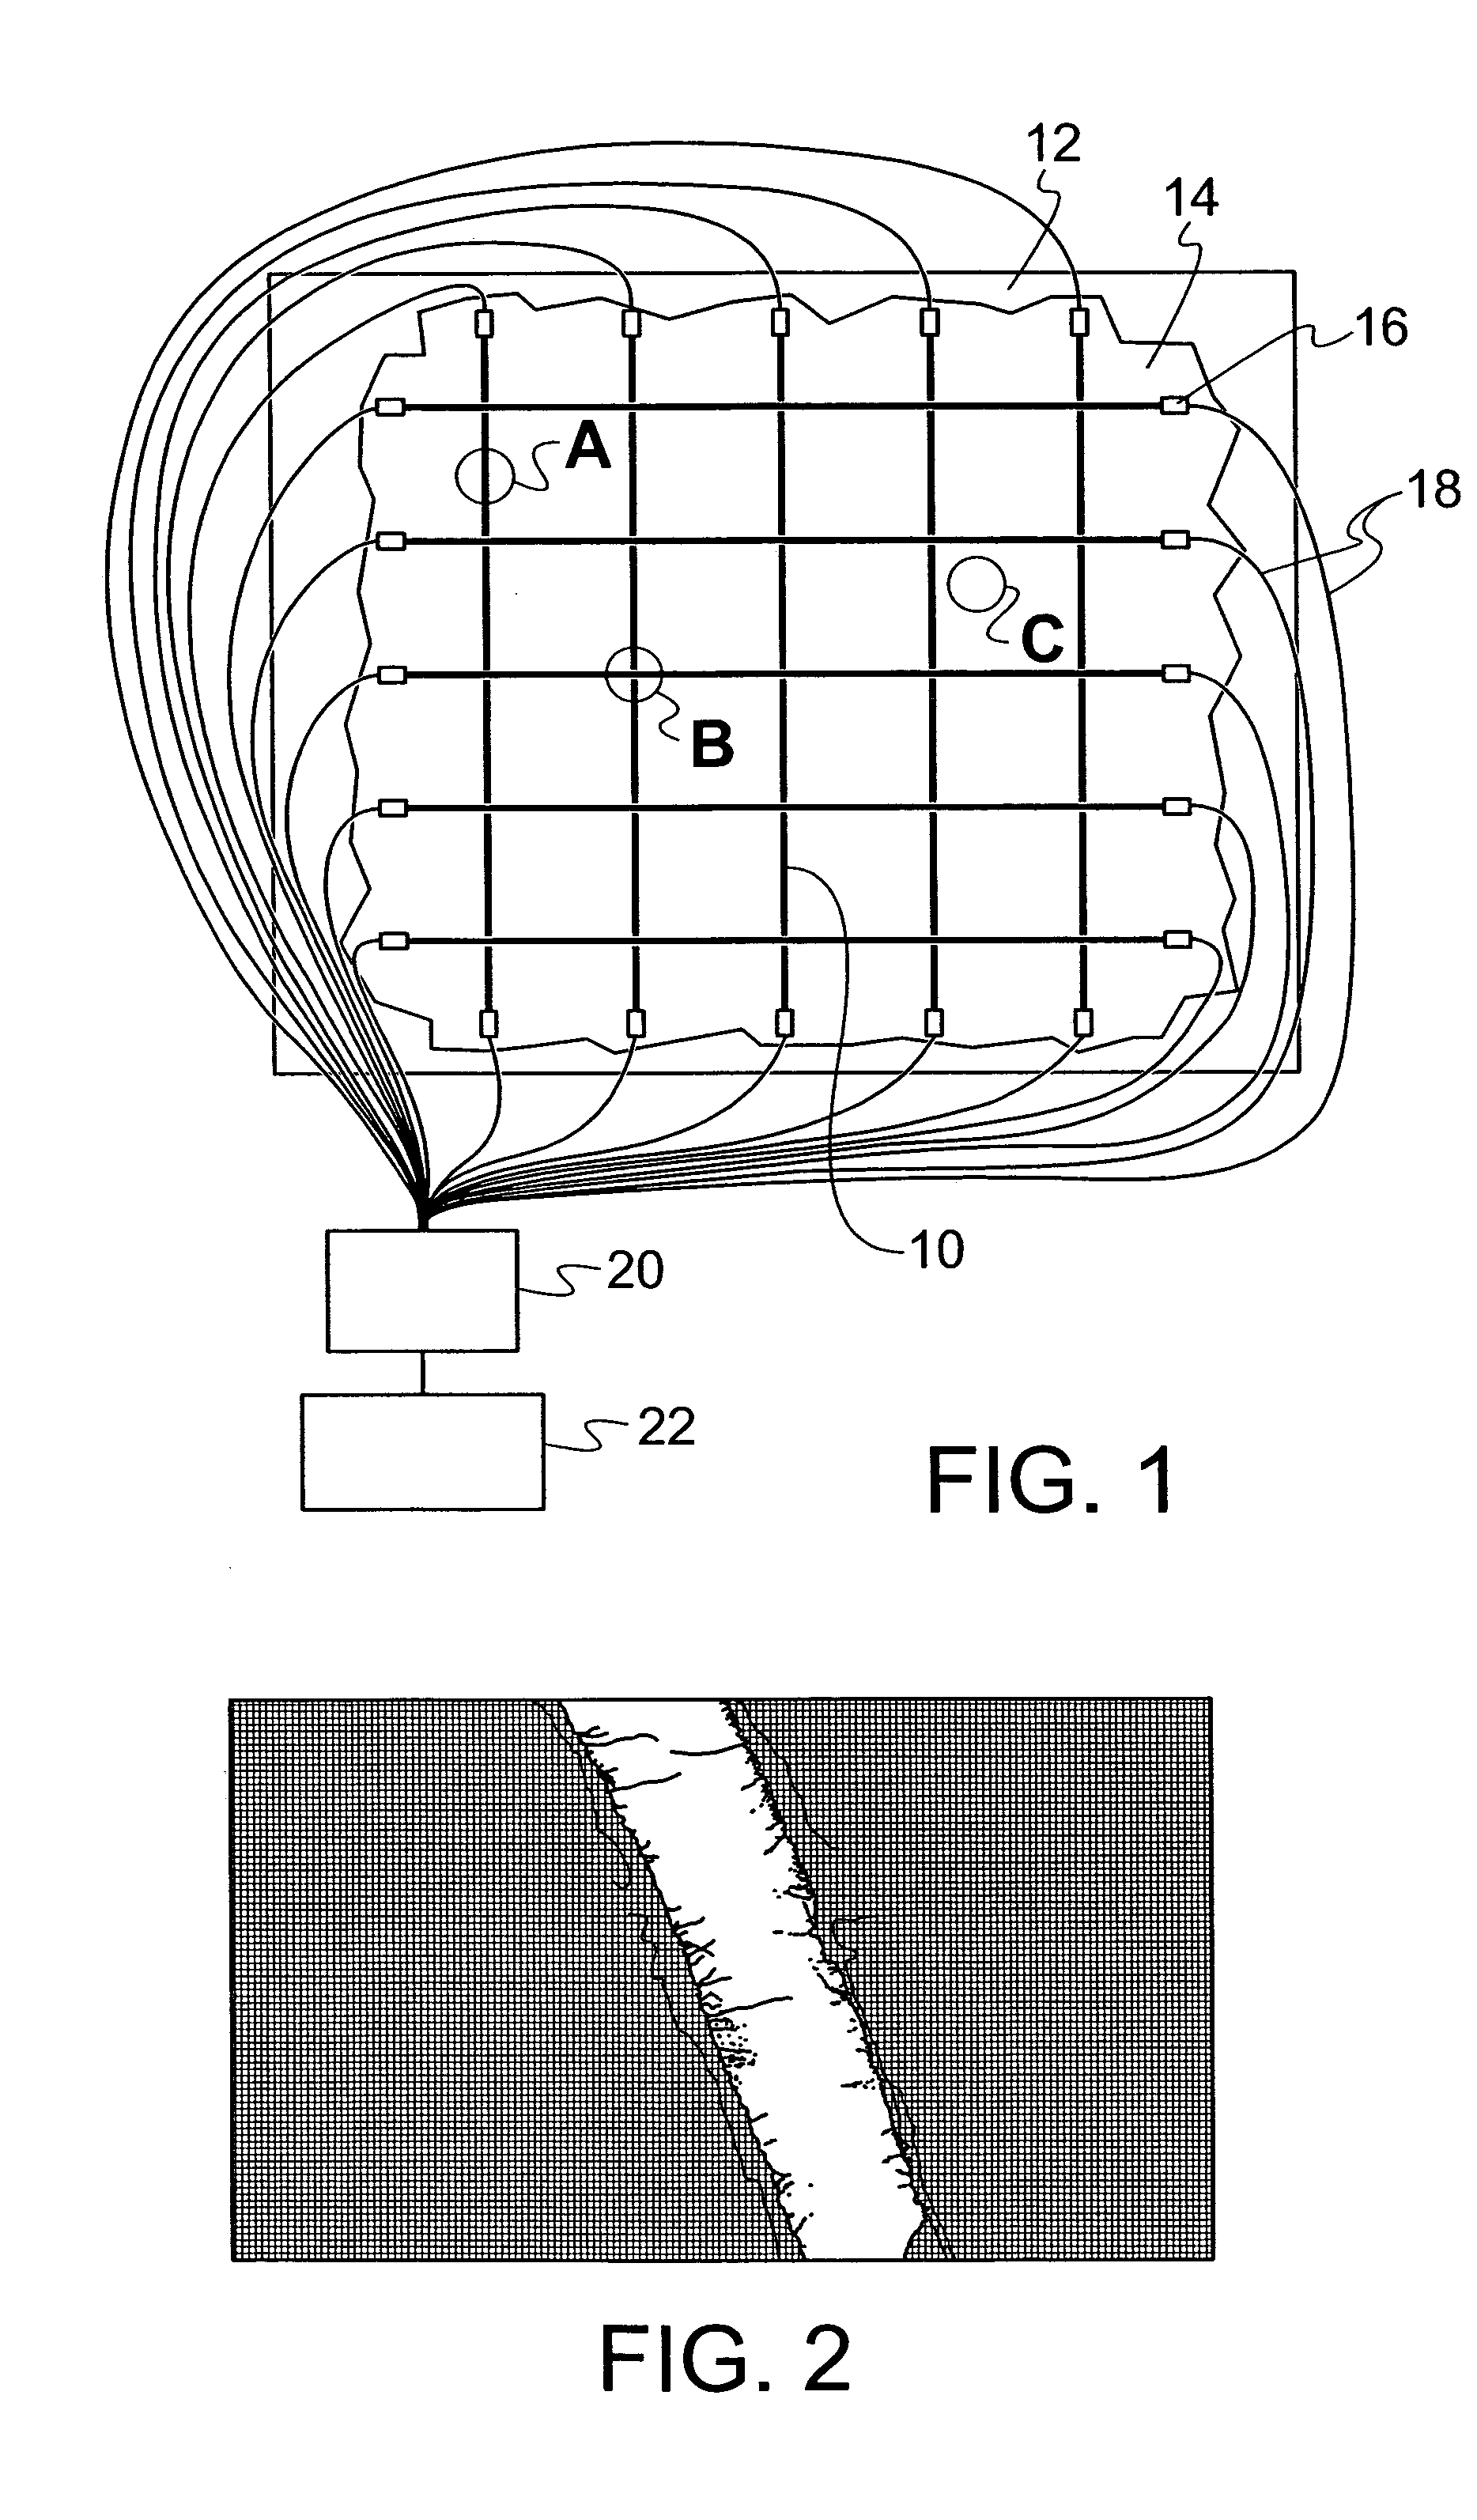 Sensing system for monitoring the structural health of composite structures